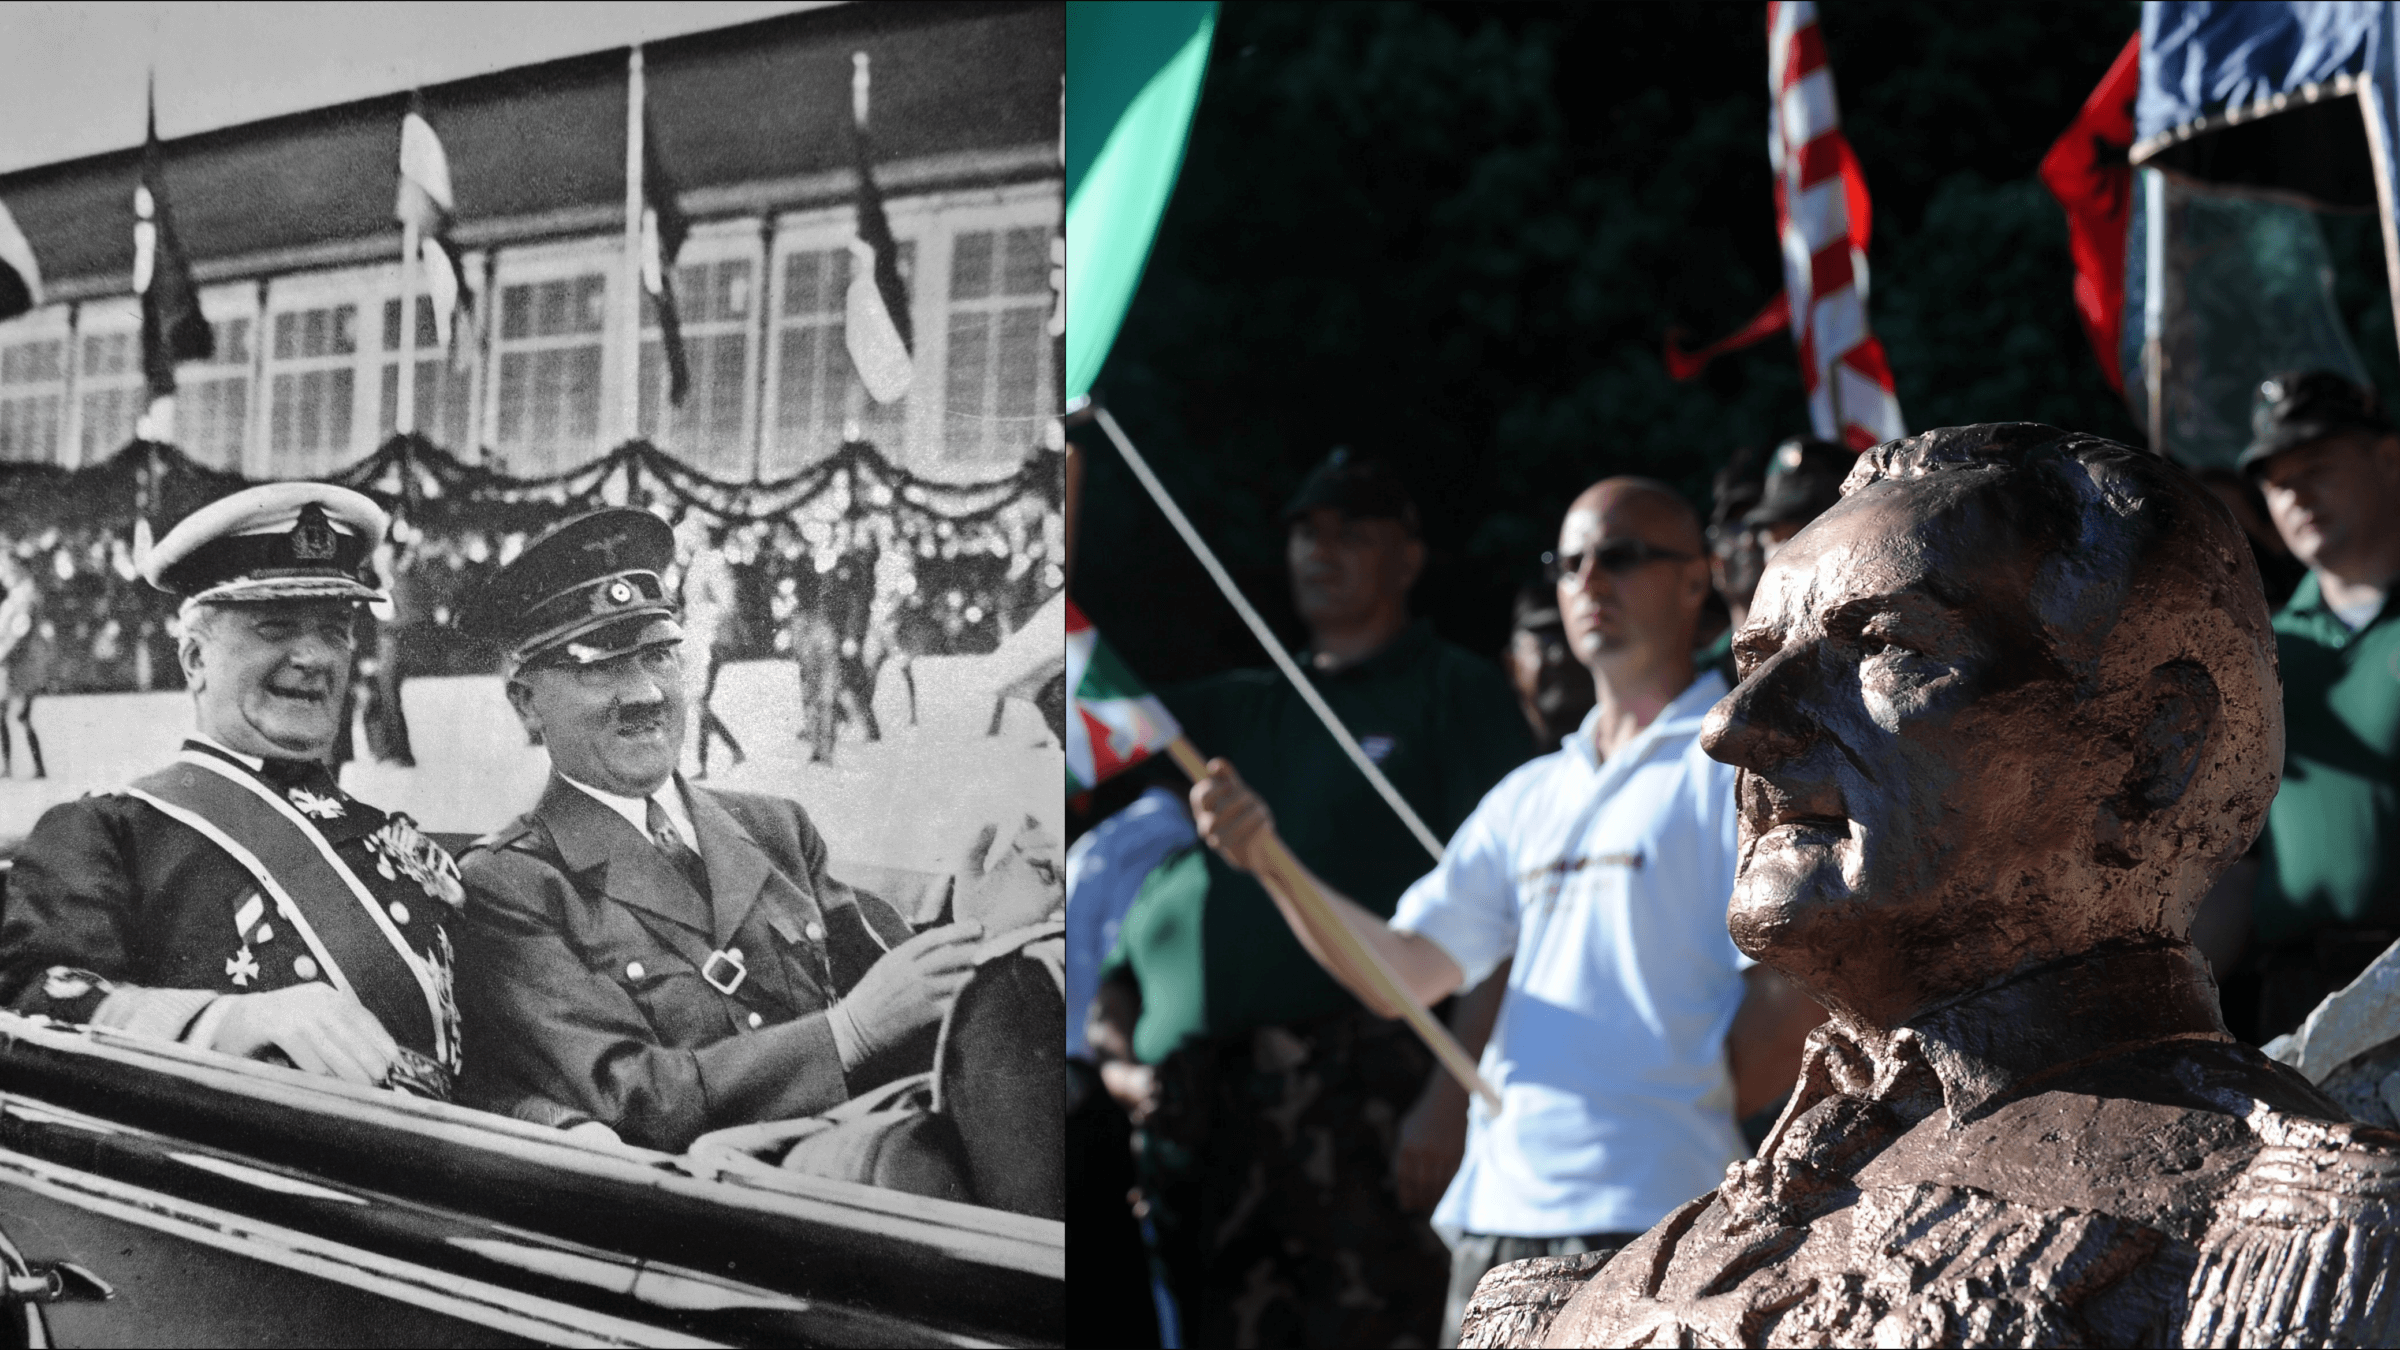 Left: Miklós Horthy with Hitler, 1938 (Wikimedia Commons). Right: far-right rally during unveiling of Horthy bust in Csókakő, June 16, 2012 (Attila Kisbenedek/AFP via Getty Images). 